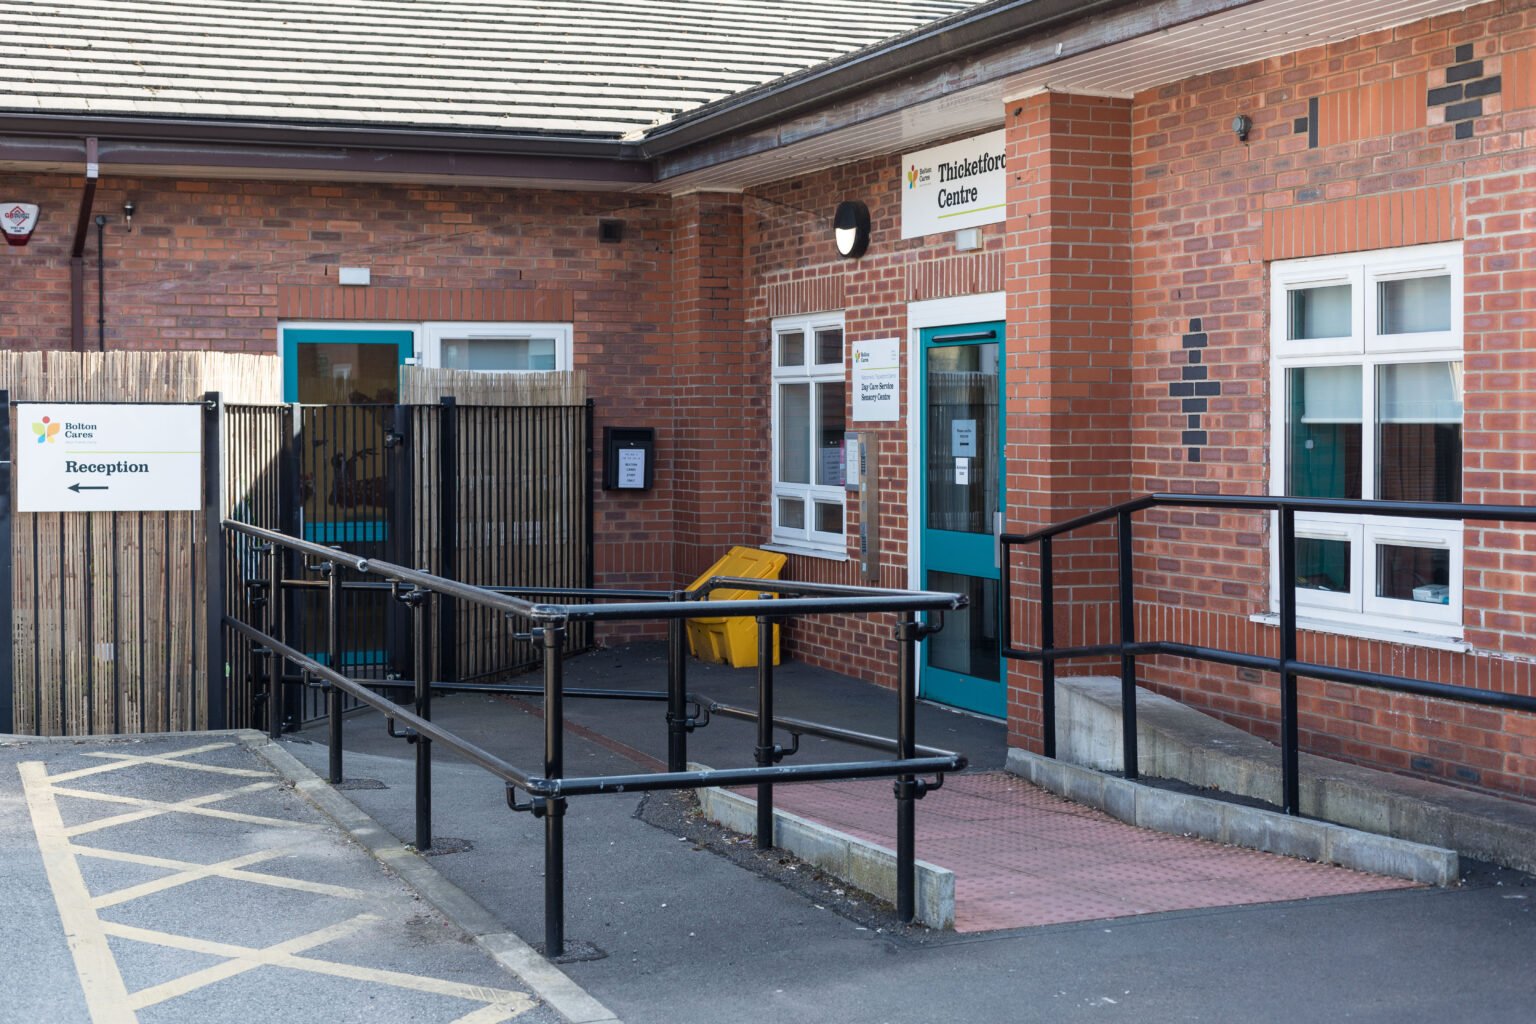 Entrance to the Thicketford Centre